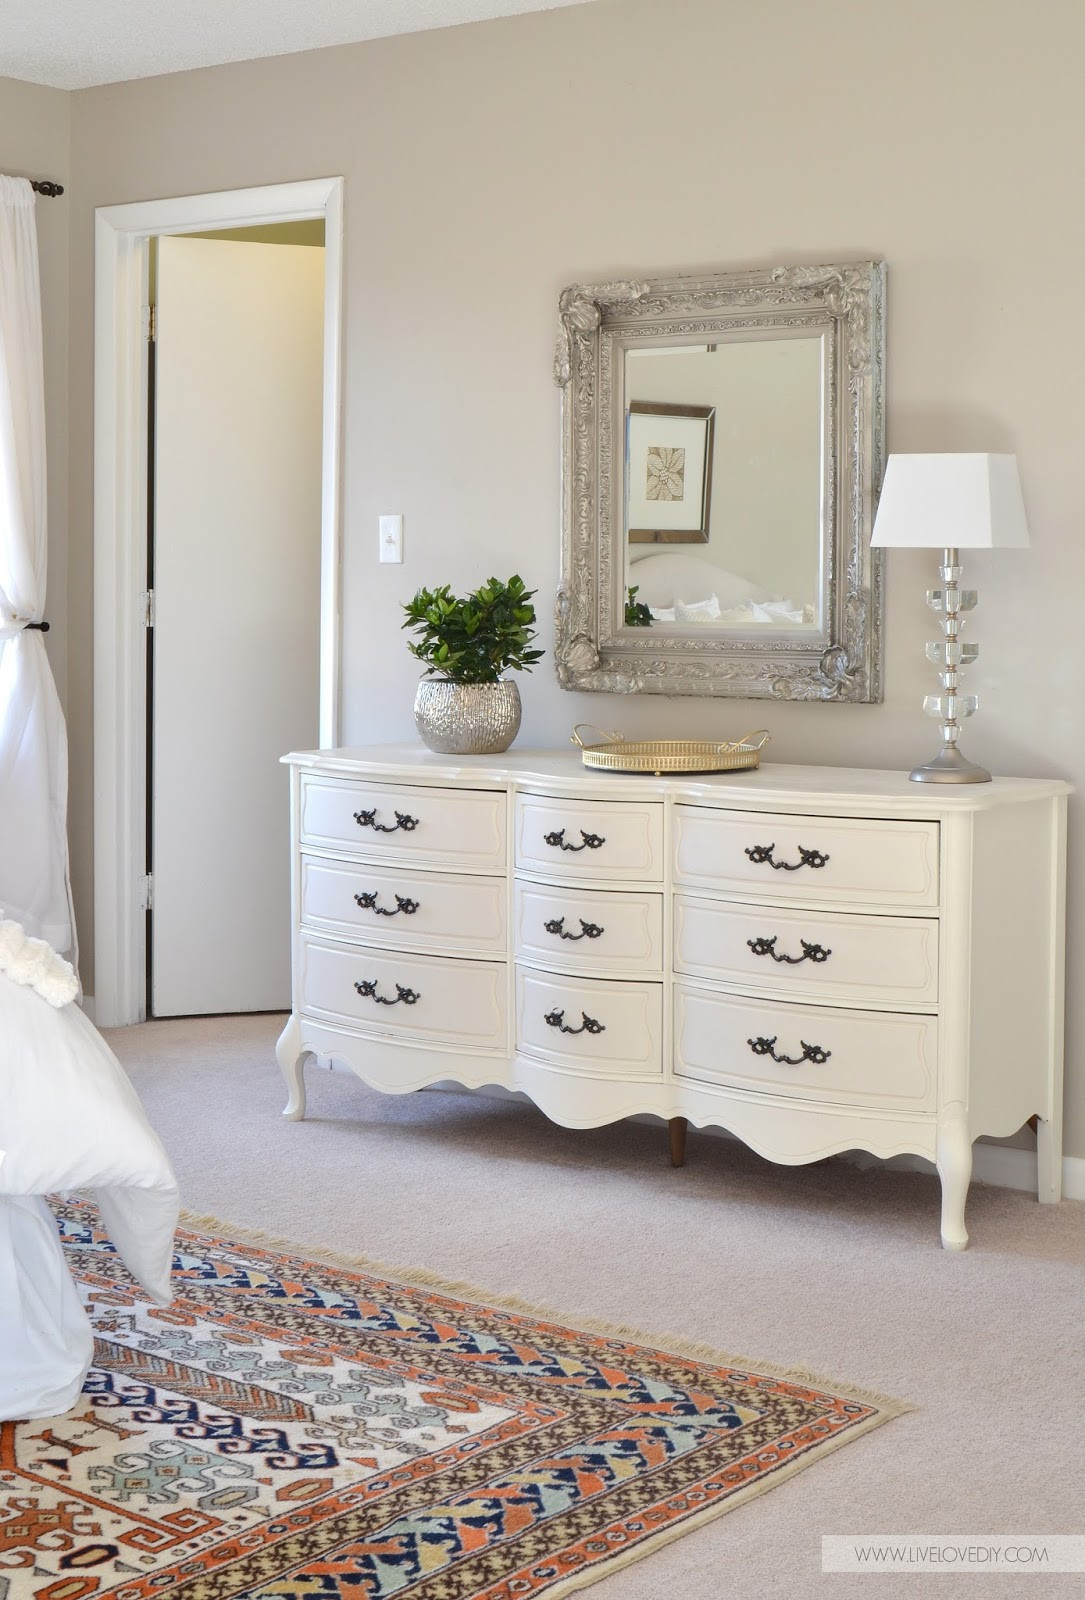 Dresser Ideas For Small Bedroom
 12 Ultra Glamorous Vintage Dressers for Your Home